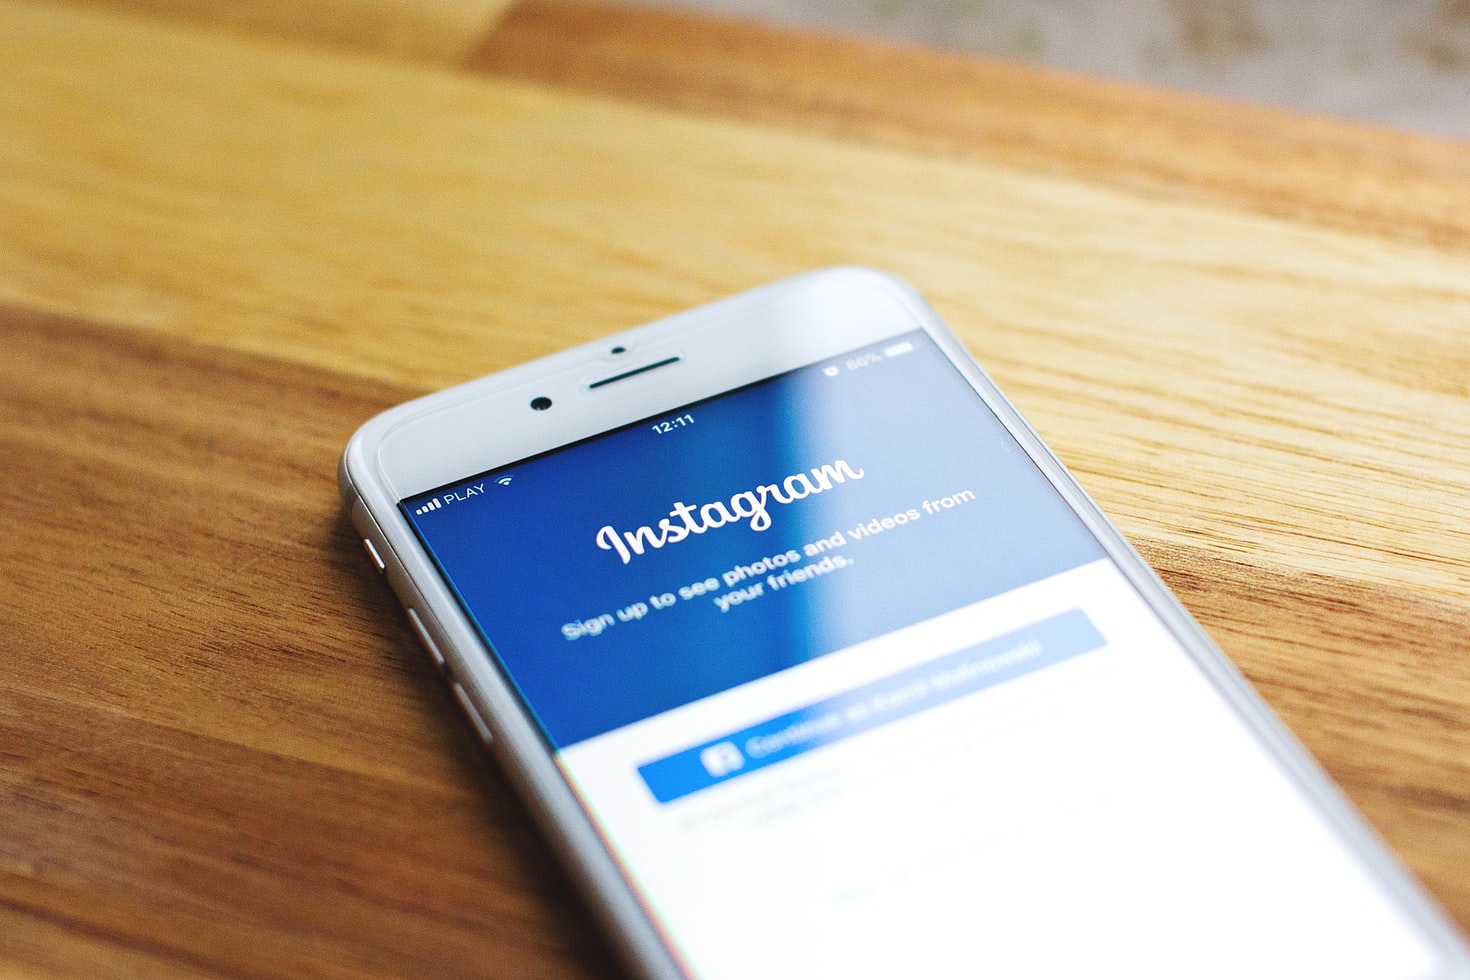 No One Will Tell You These Tips to Grow Your Business on Instagram!